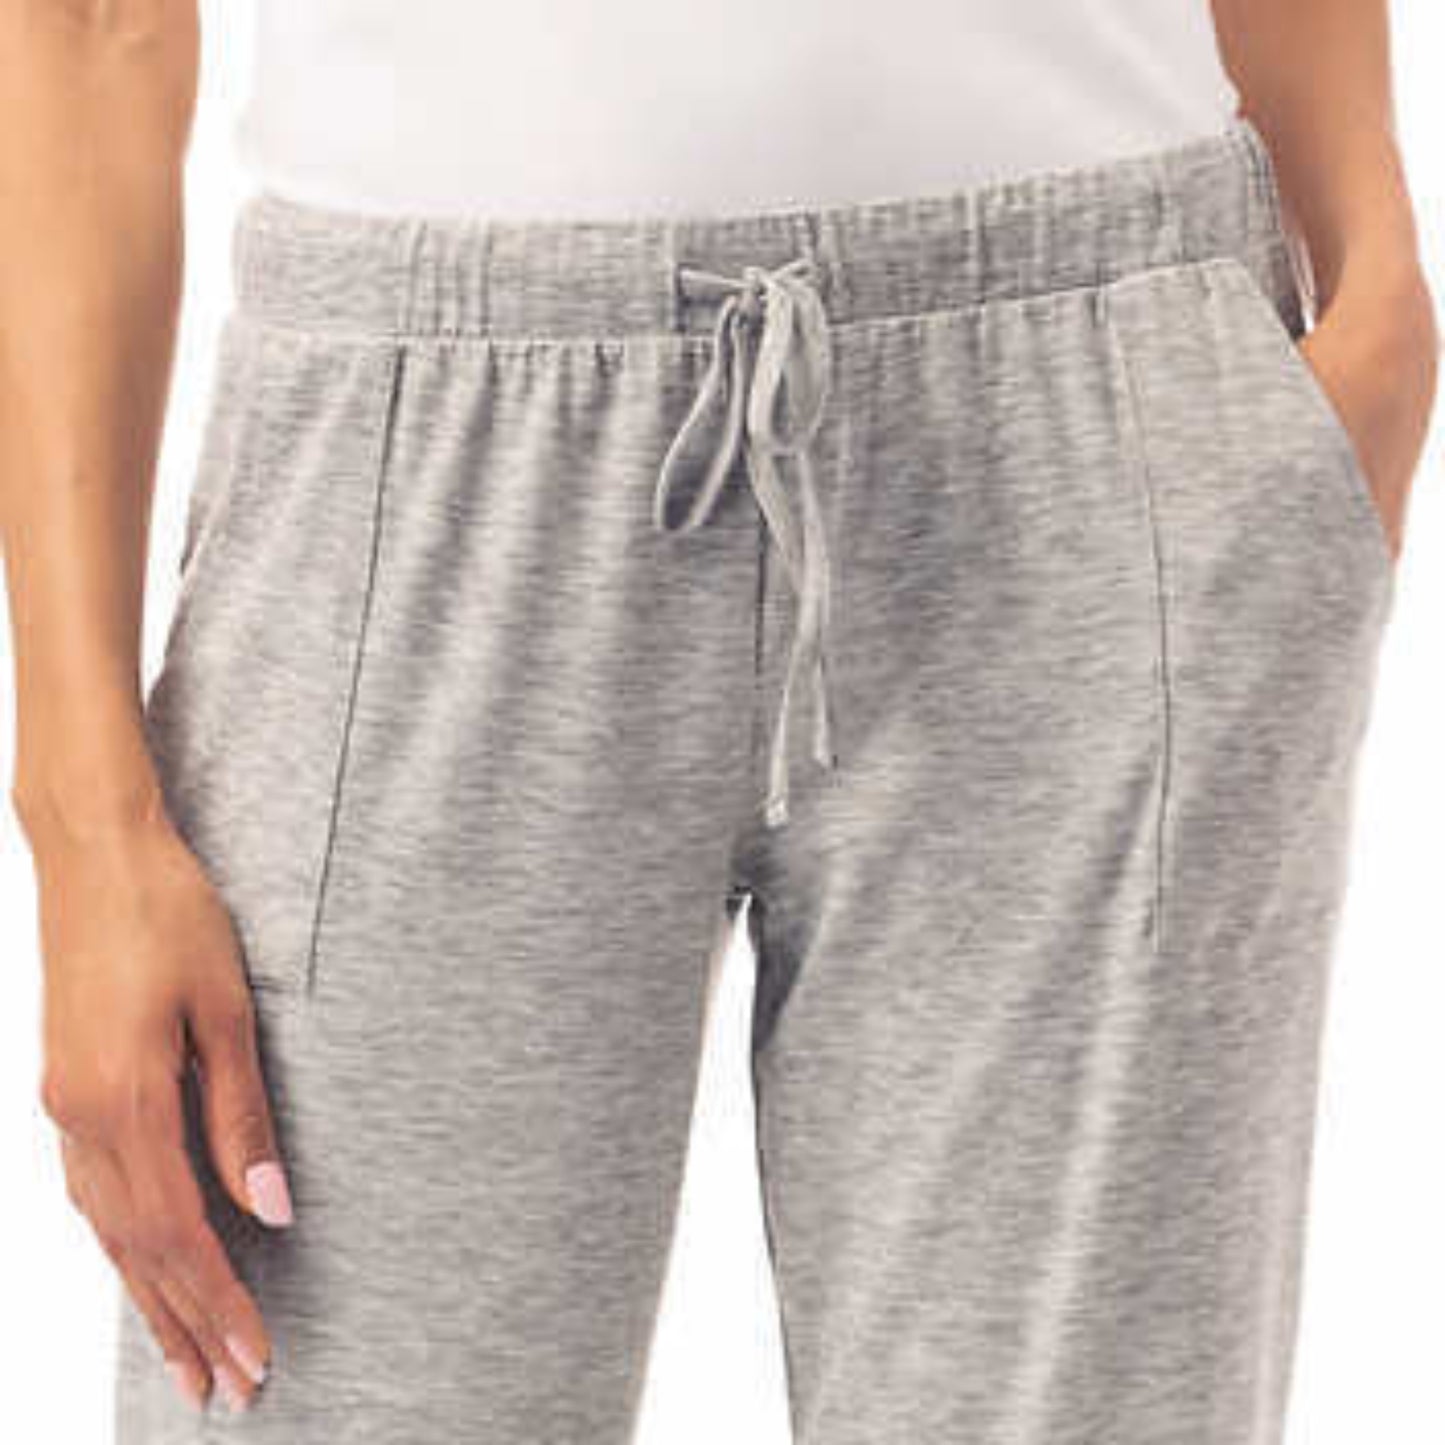 Lucky Brand Ultra Soft Jersey Relaxed Fit 2-pack Lounge Pajama Pants